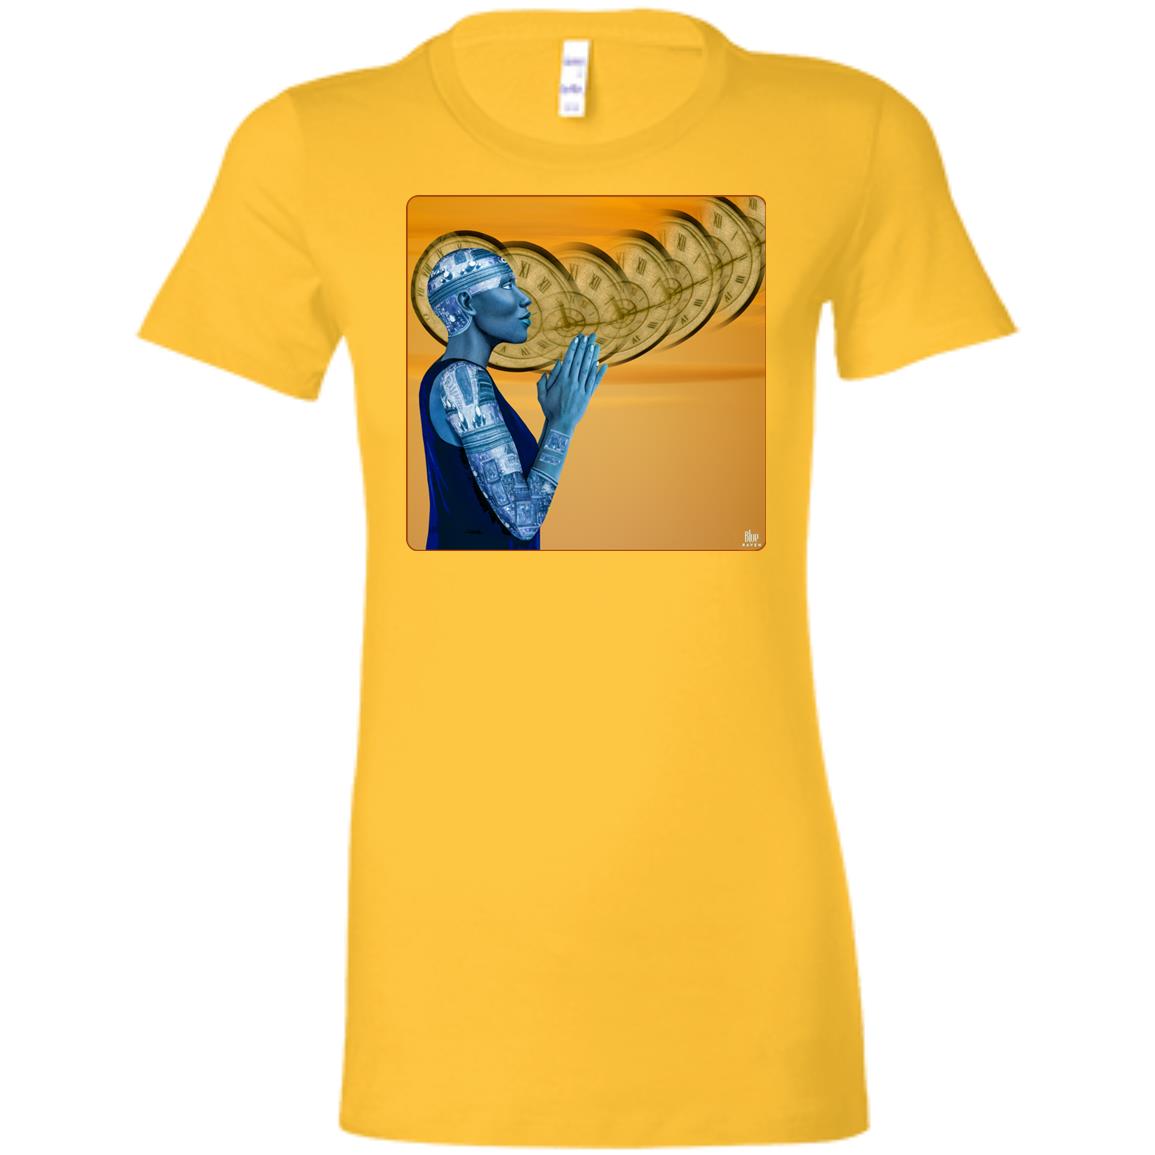 the seer - Women's Fitted T-Shirt